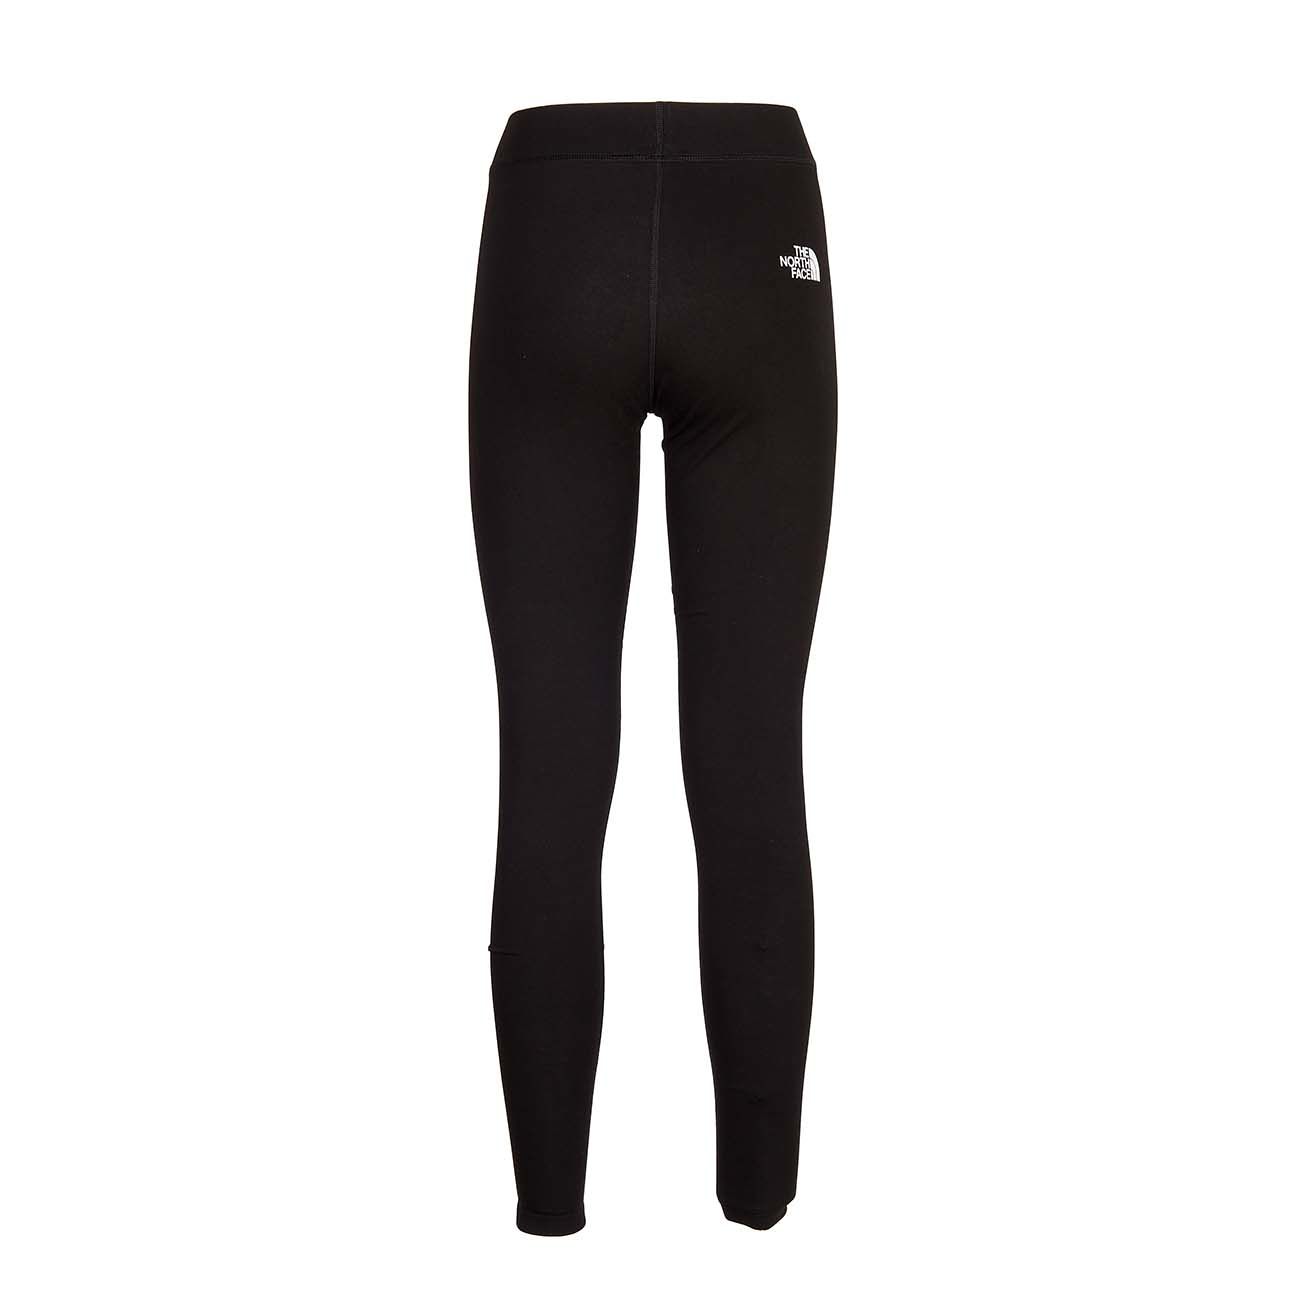 THE NORTH FACE STRETCH LEGGINGS WITH SMALL PRINTED LOGO Woman Black